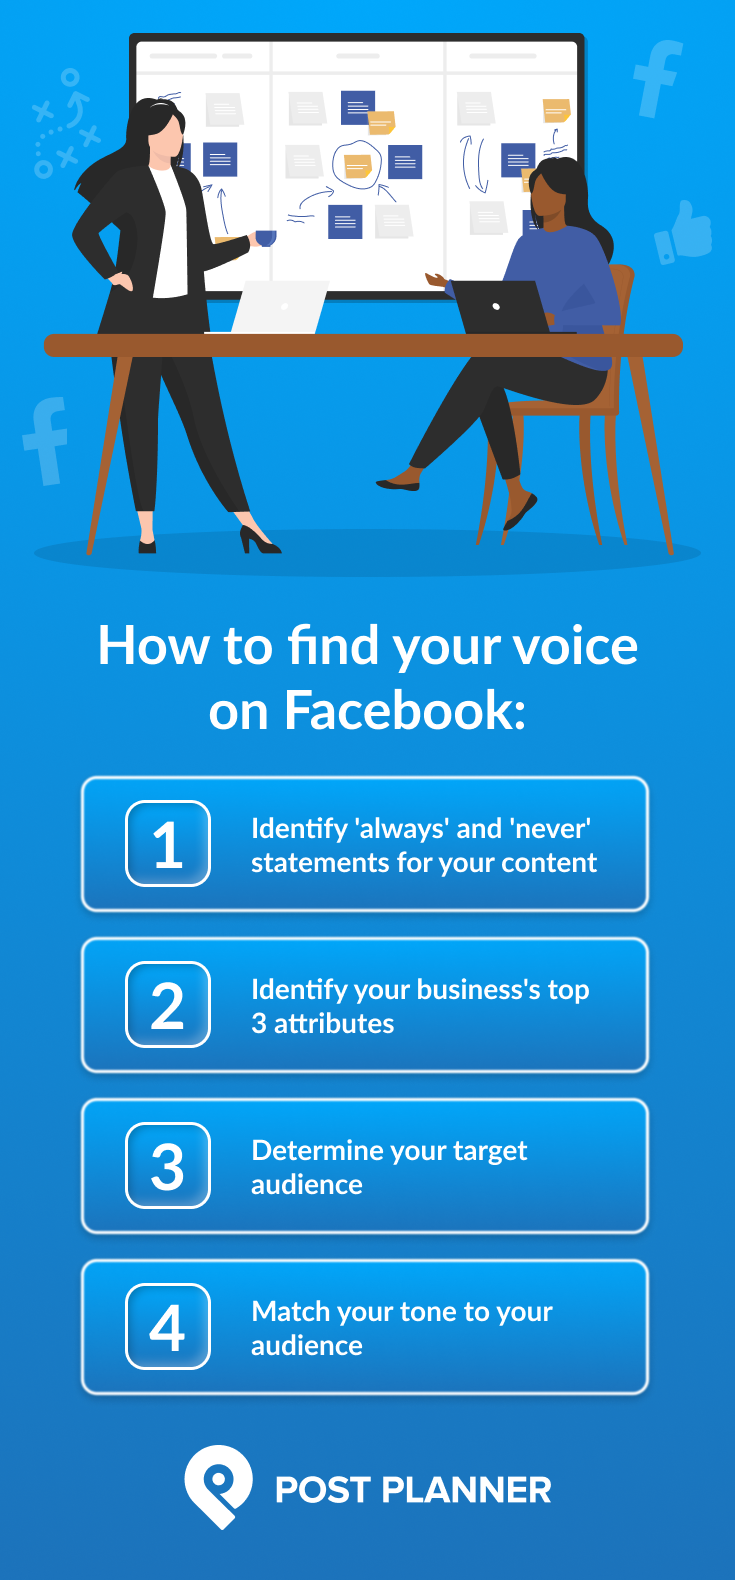 How to find your voice on Facebook